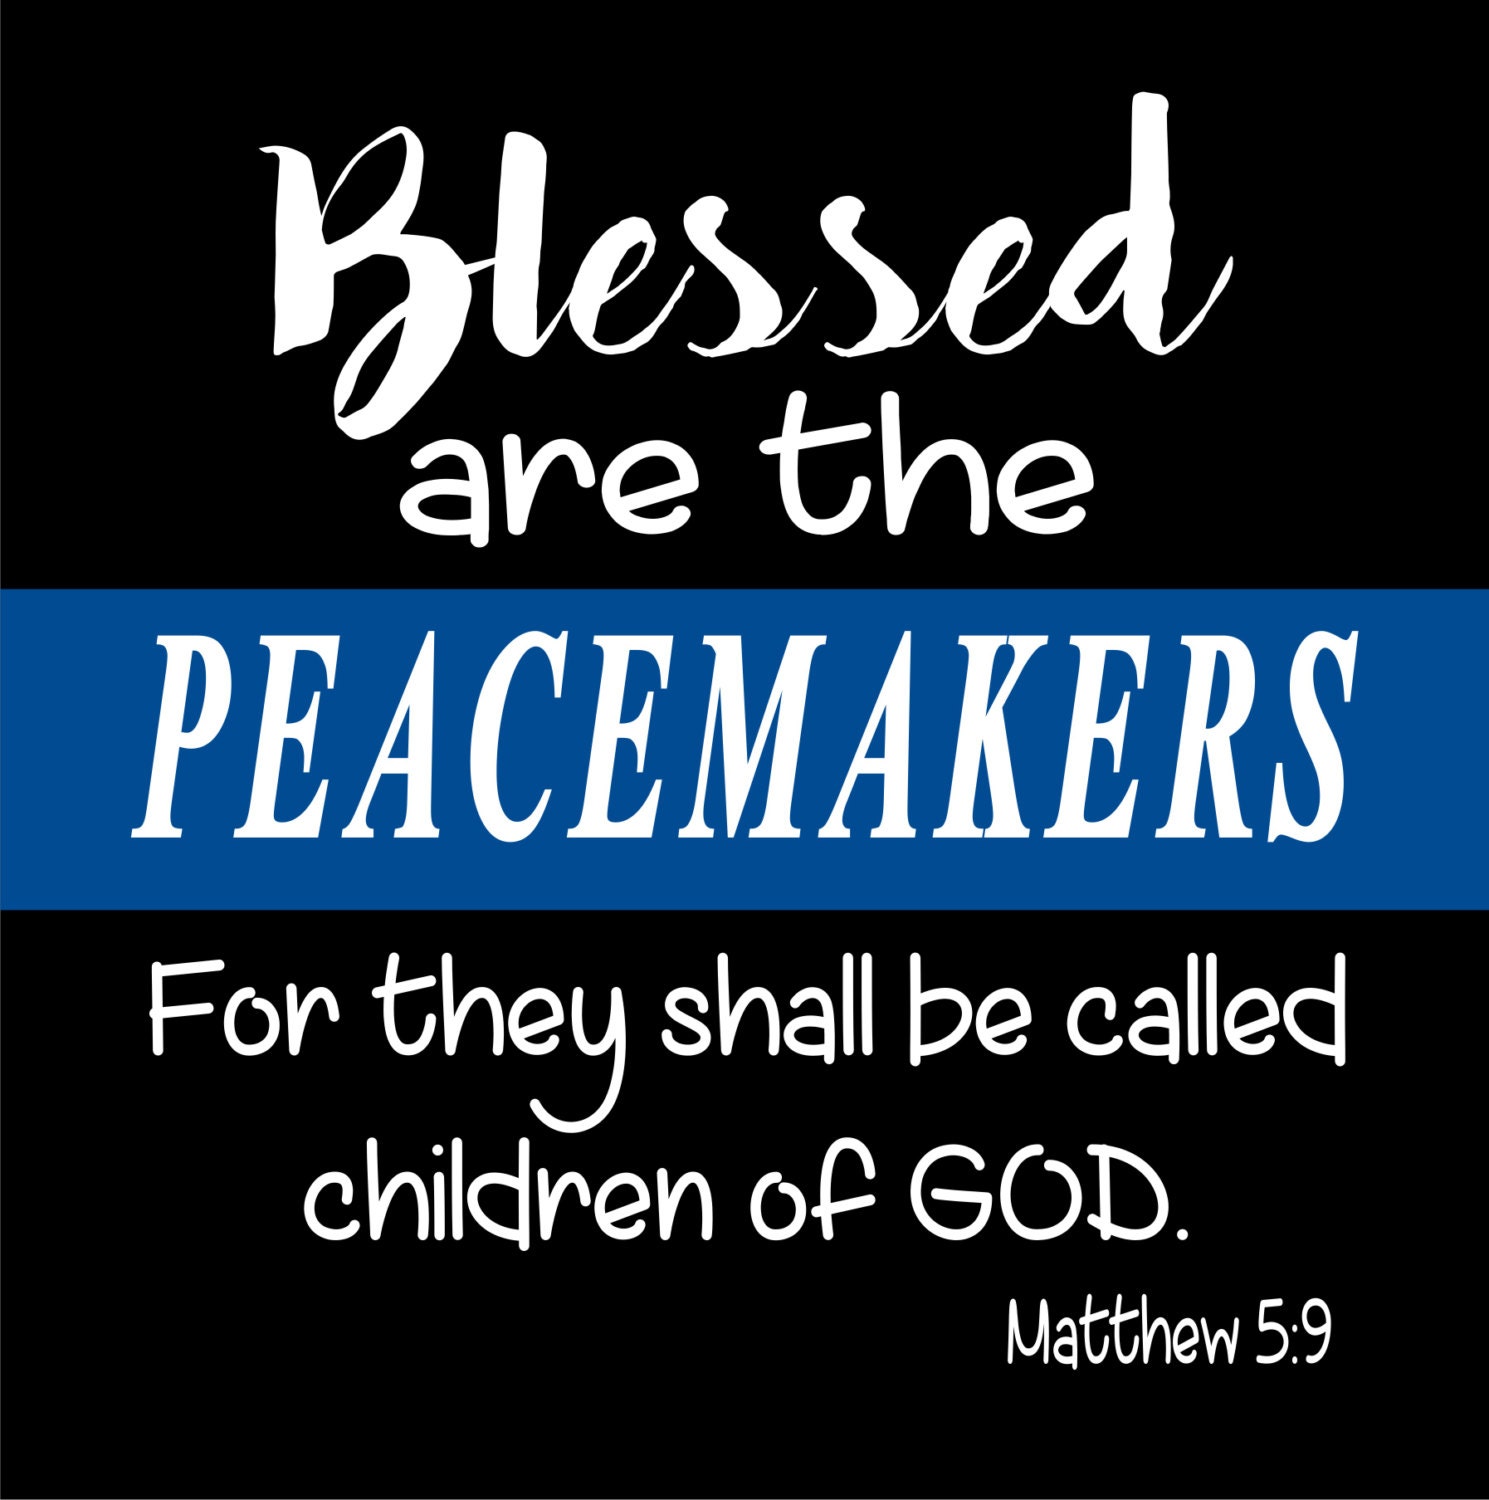 Blessed Are The Peacemakers Matthew 59 By Tewscreations On Etsy